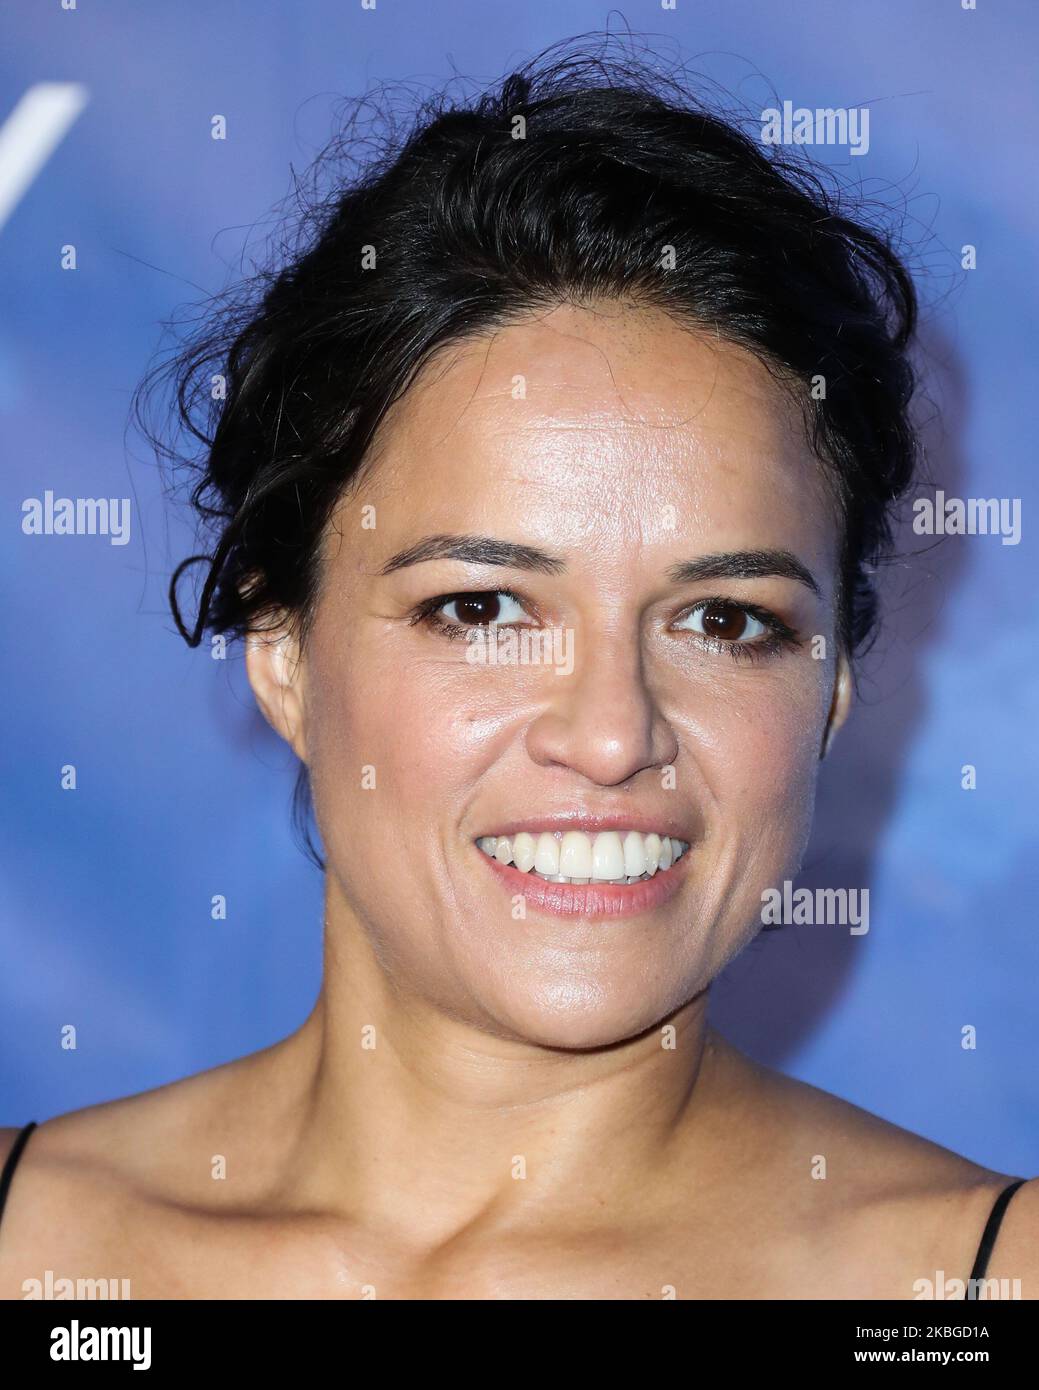 BEVERLY HILLS, LOS ANGELES, CALIFORNIA, USA - FEBRUARY 06: Actress Michelle Rodriguez arrives at the 2020 Hollywood For The Global Ocean Gala Honoring HSH Prince Albert II Of Monaco held at the Palazzo di Amore on February 6, 2020 in Beverly Hills, Los Angeles, California, United States. (Photo by Xavier Collin/Image Press Agency/NurPhoto) Stock Photo